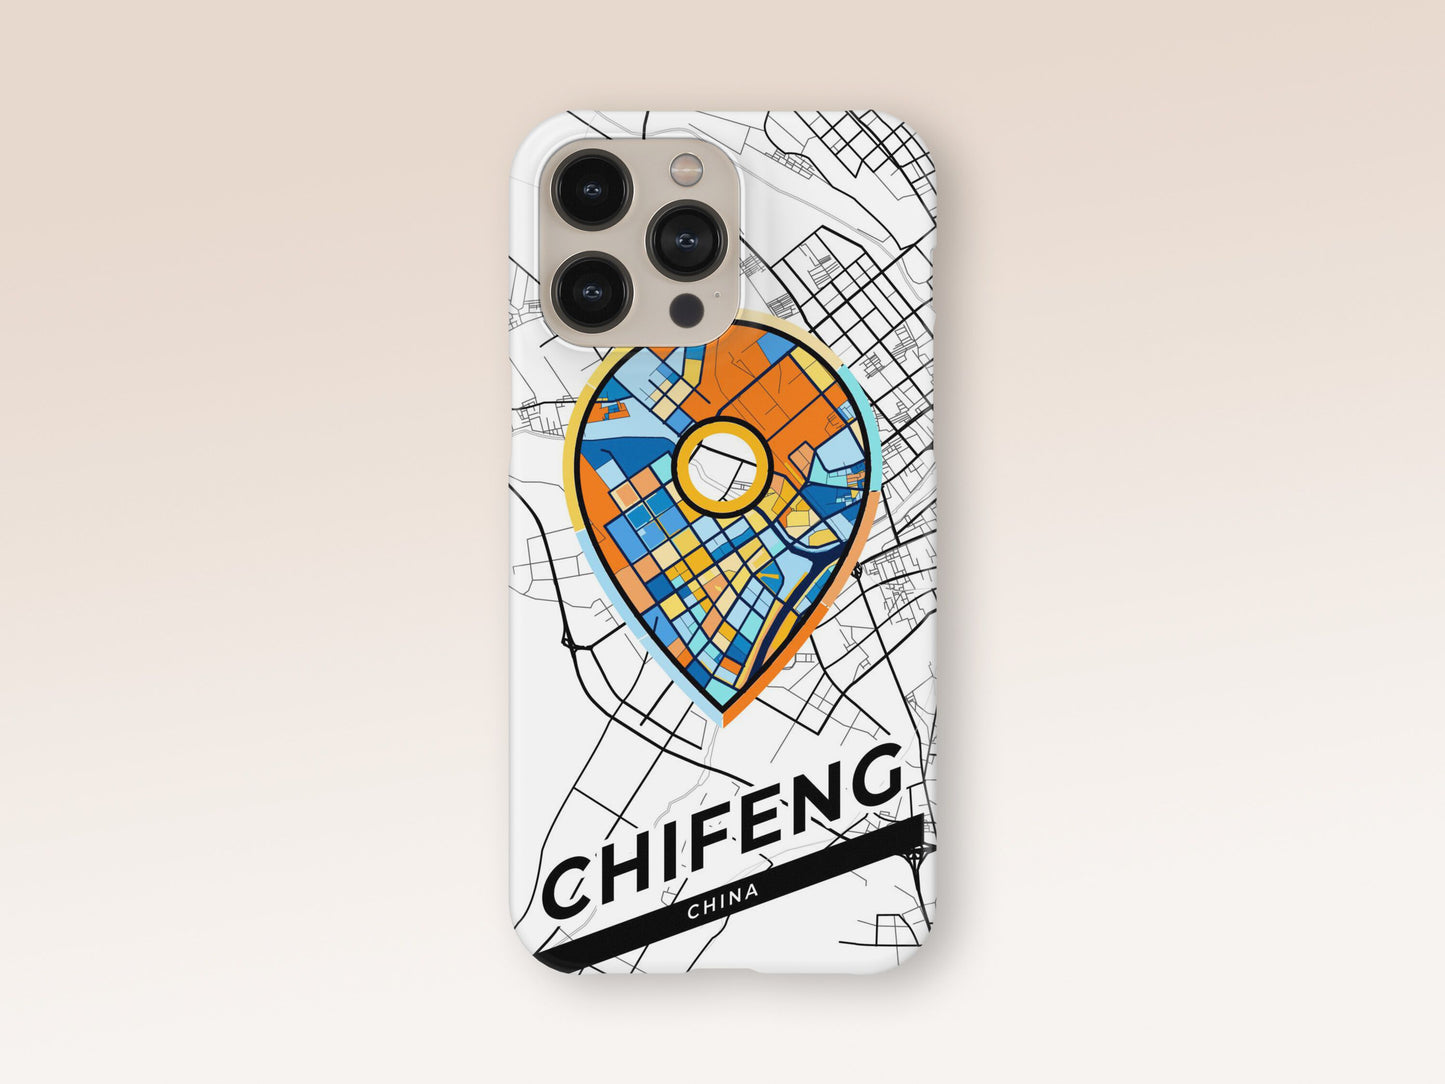 Chifeng China slim phone case with colorful icon. Birthday, wedding or housewarming gift. Couple match cases. 1